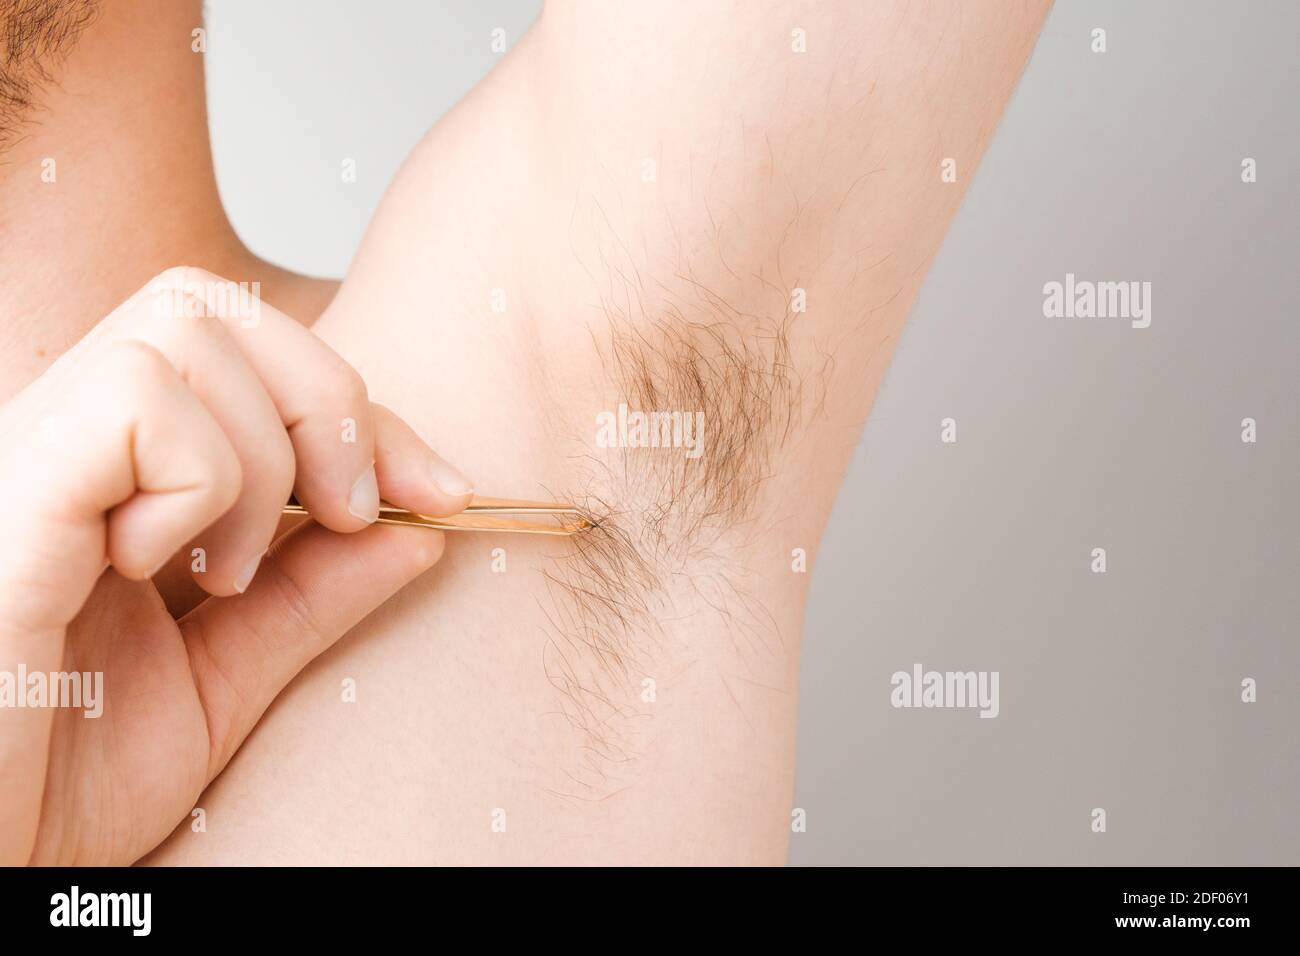 Man remove hair using tweezers from armpit. Unshaved armpits or underarm. Depilation and hair remove procedure, Body shaming concept Stock Photo